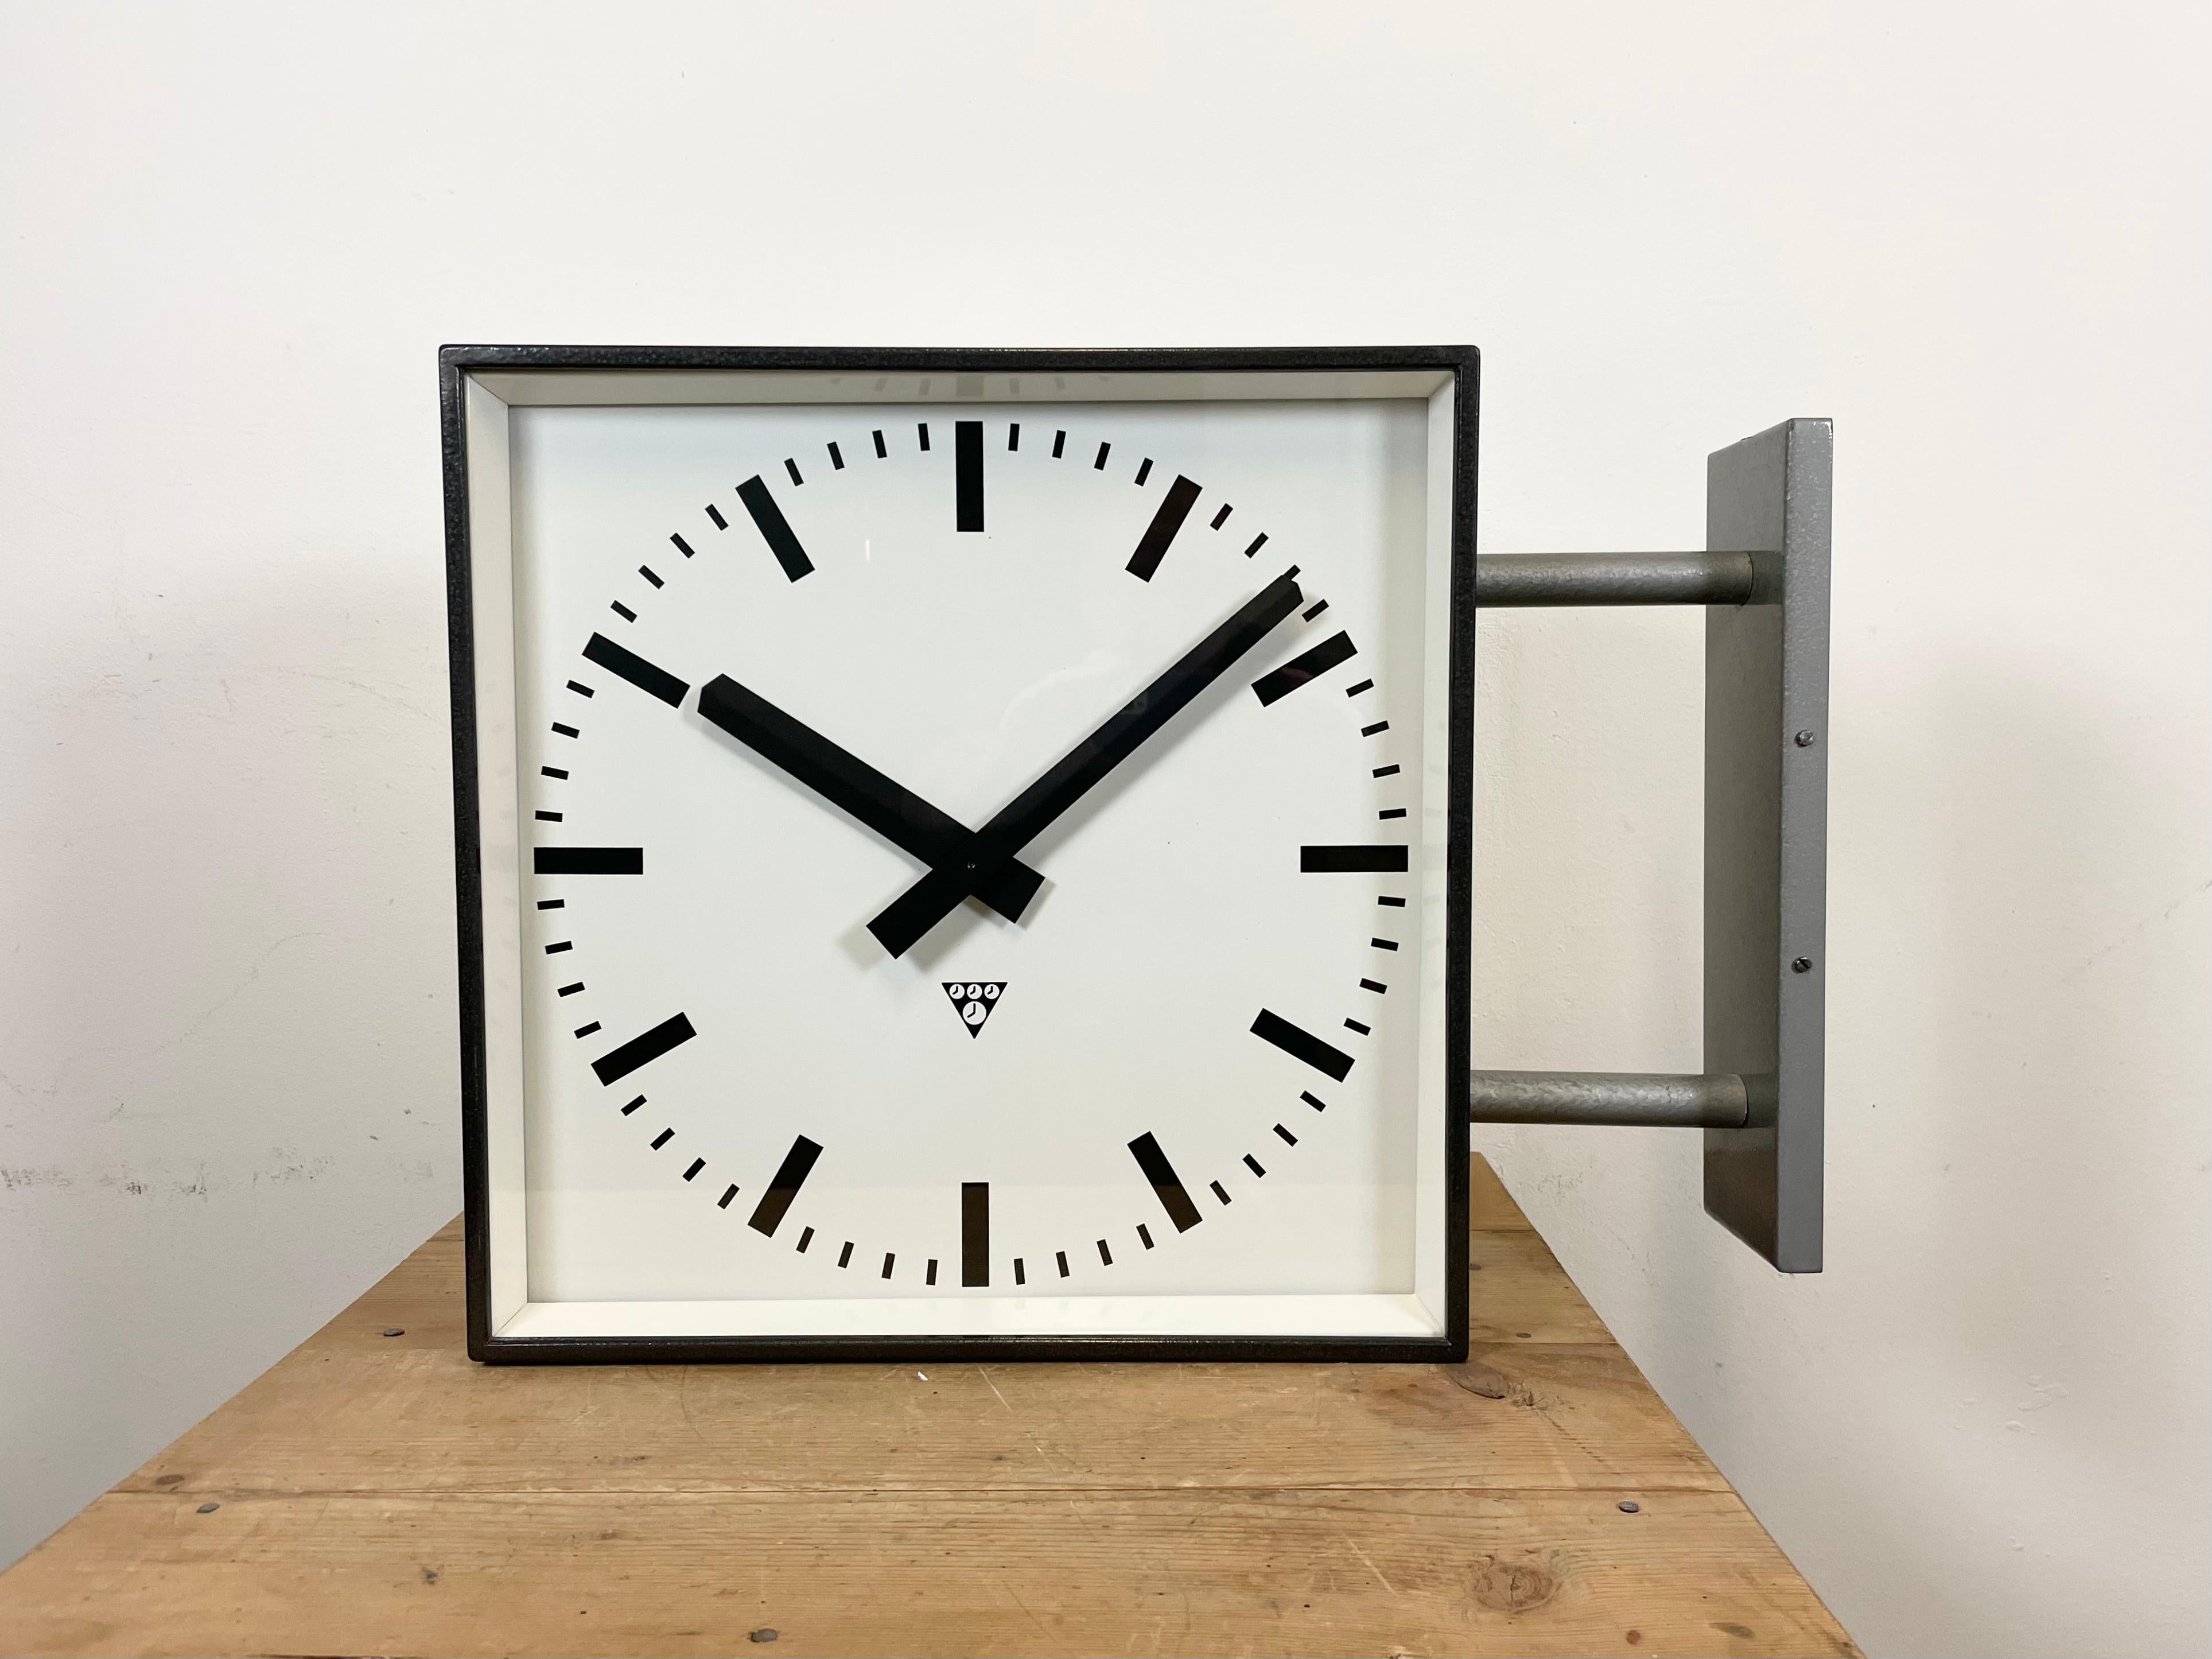 This square double-sided railway, school or factory wall clock was produced by Pragotron, in former Czechoslovakia, during the 1970s. The piece features a grey hammerpaint metal body, a clear glass cover, and an aluminum dial and hands. The clock